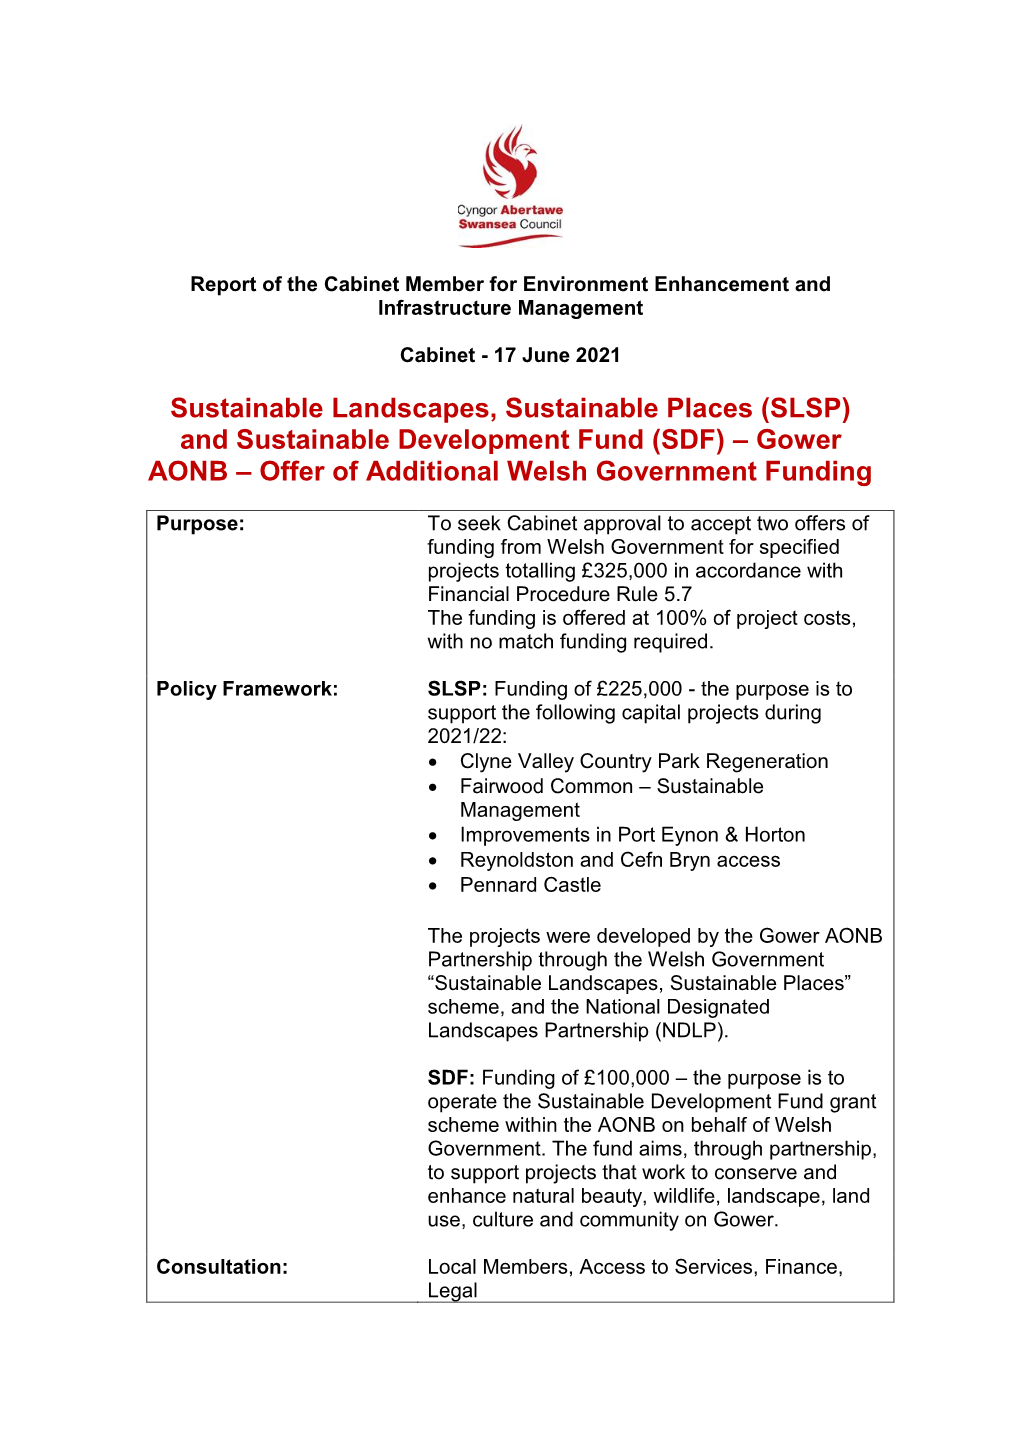 Report of the Cabinet Member for Environment Enhancement and Infrastructure Management